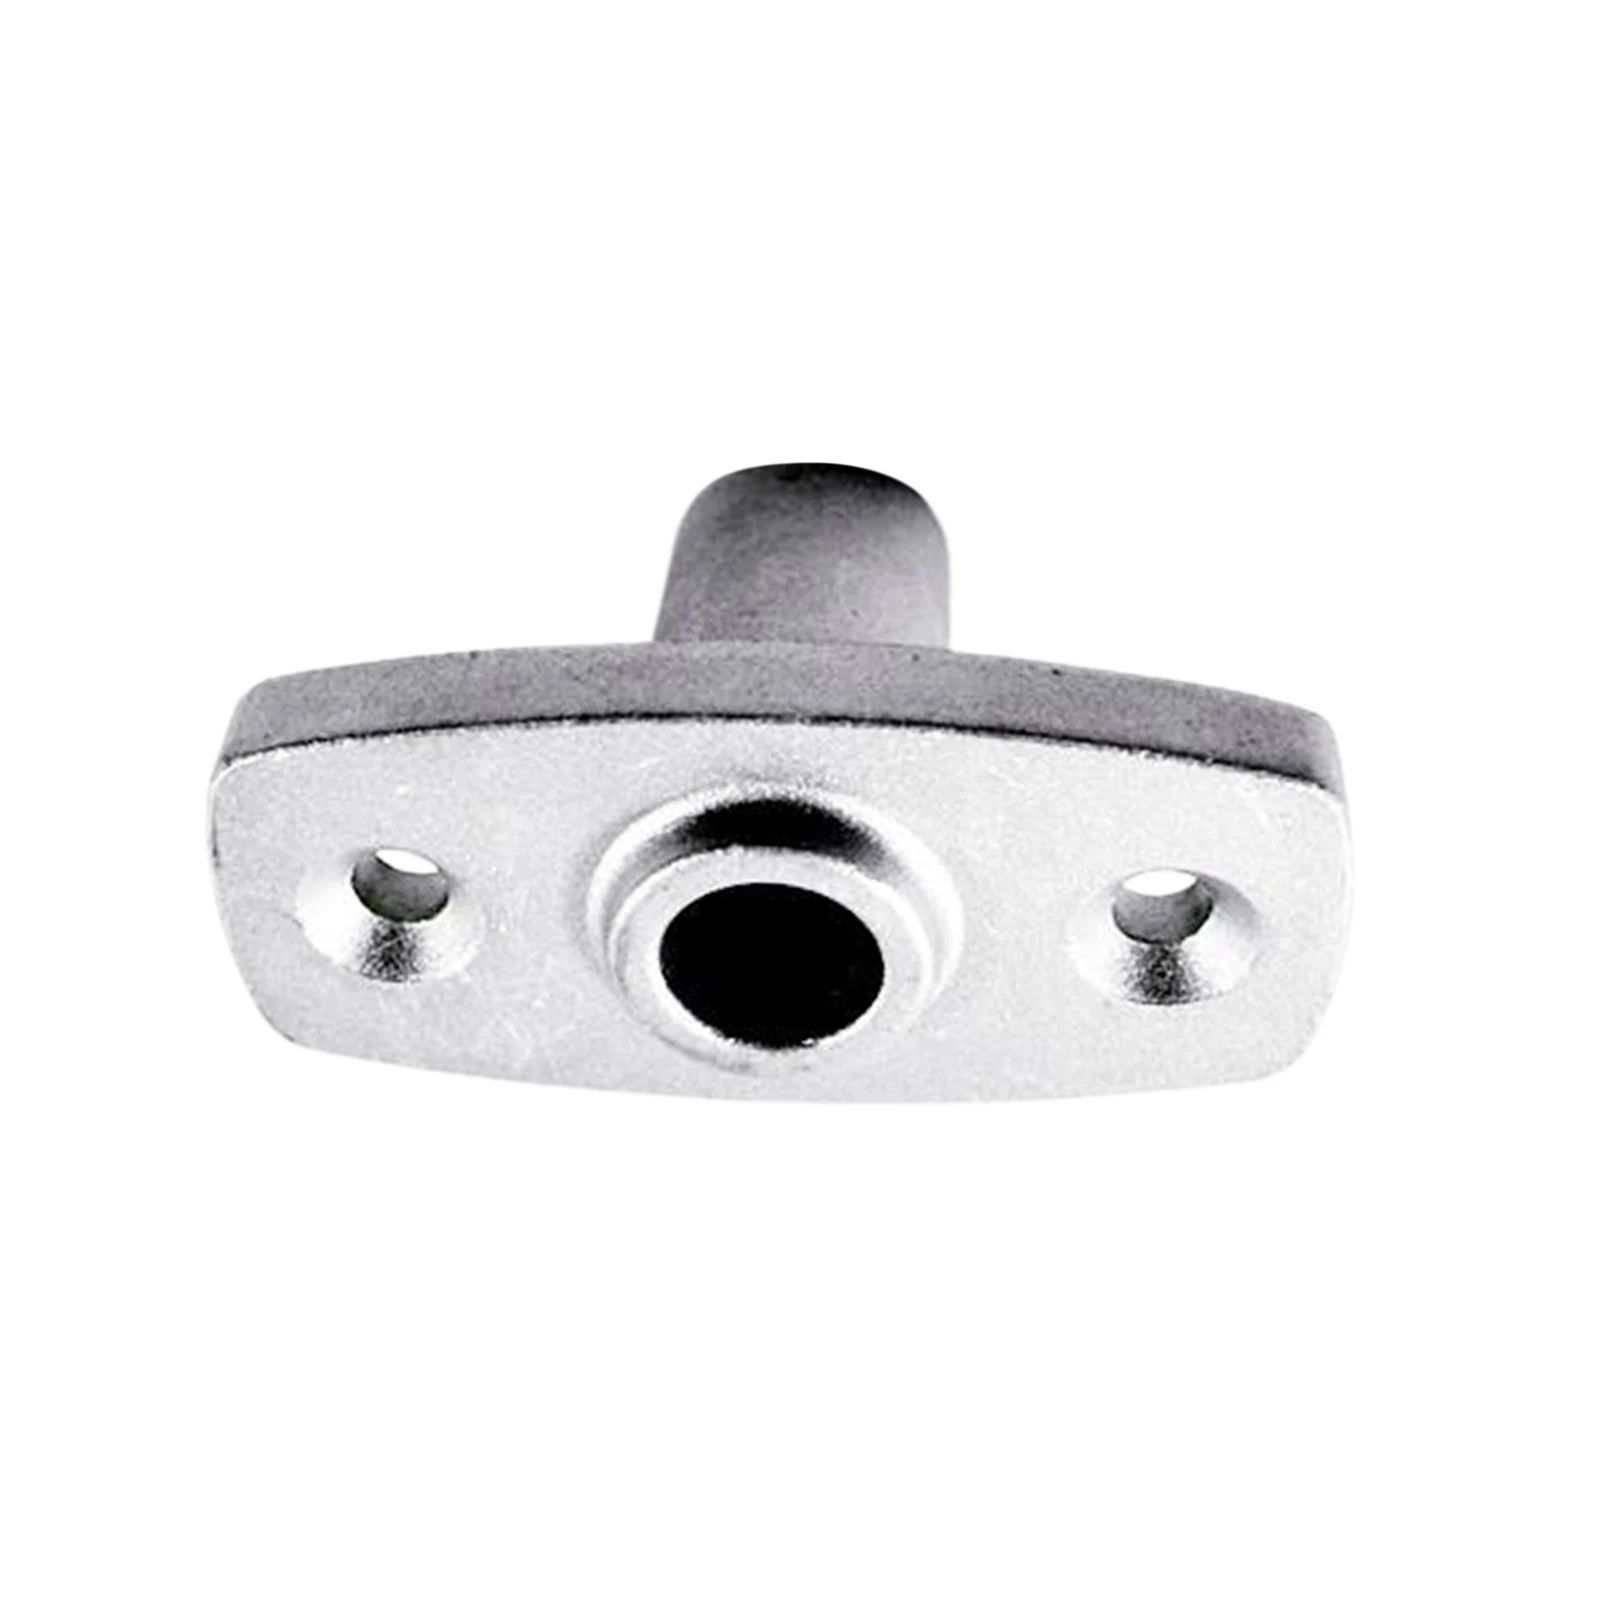 Boat Parts Accessories Oarlock /Rowlock Socket , 316 Stainless Steel, Easy to Replace